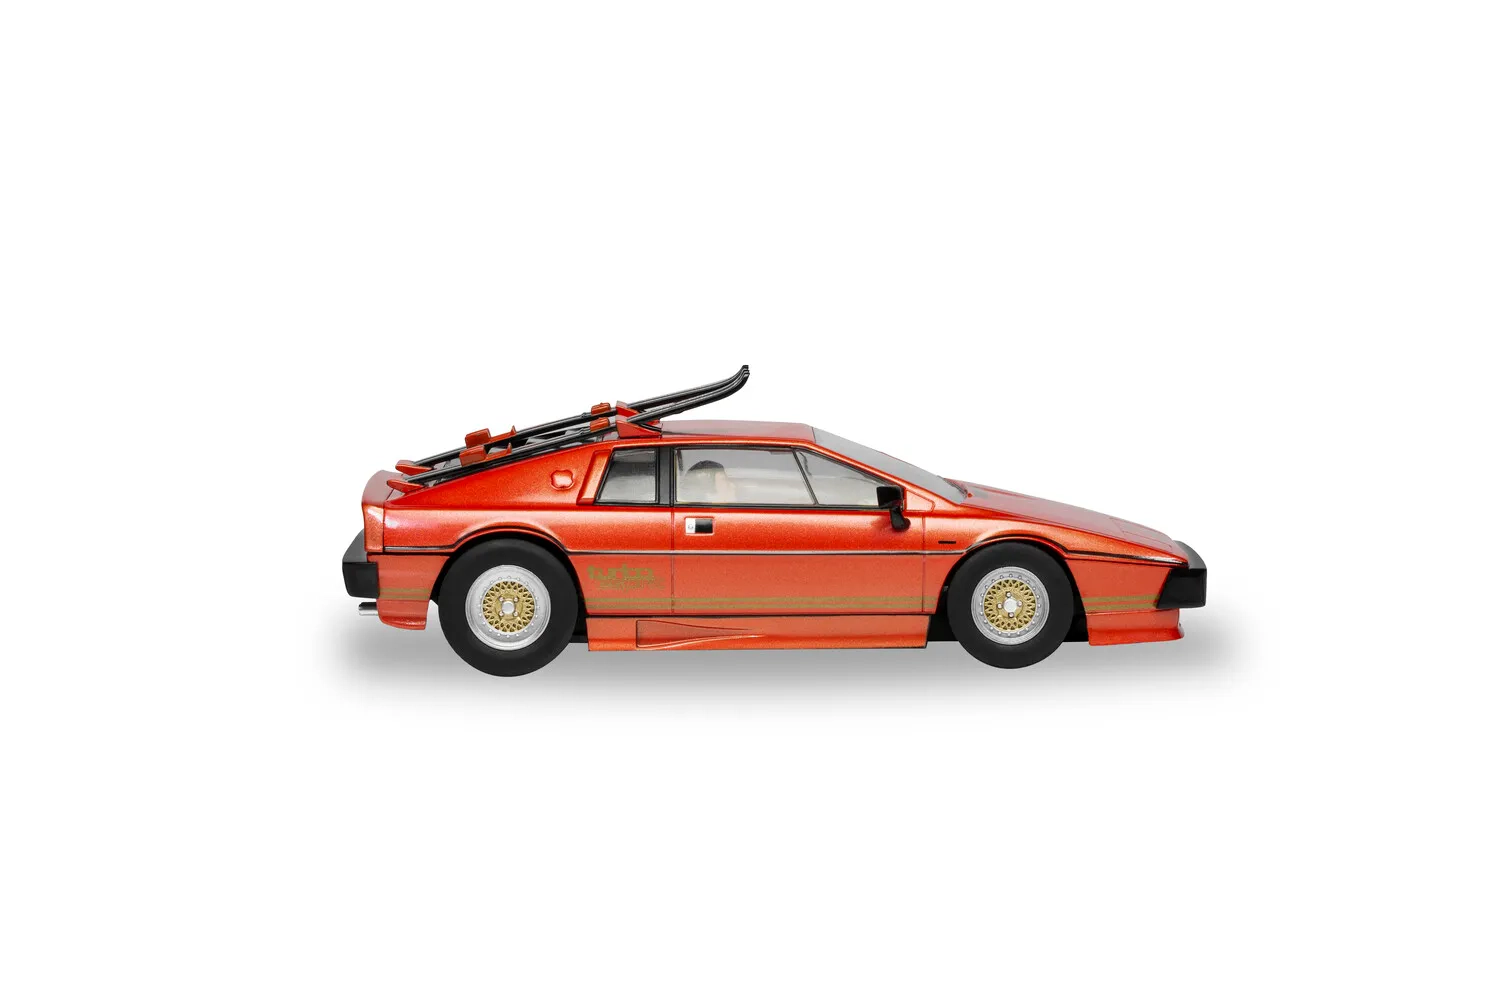 James Bond Lotus Esprit Turbo - 'For Your Eyes Only'